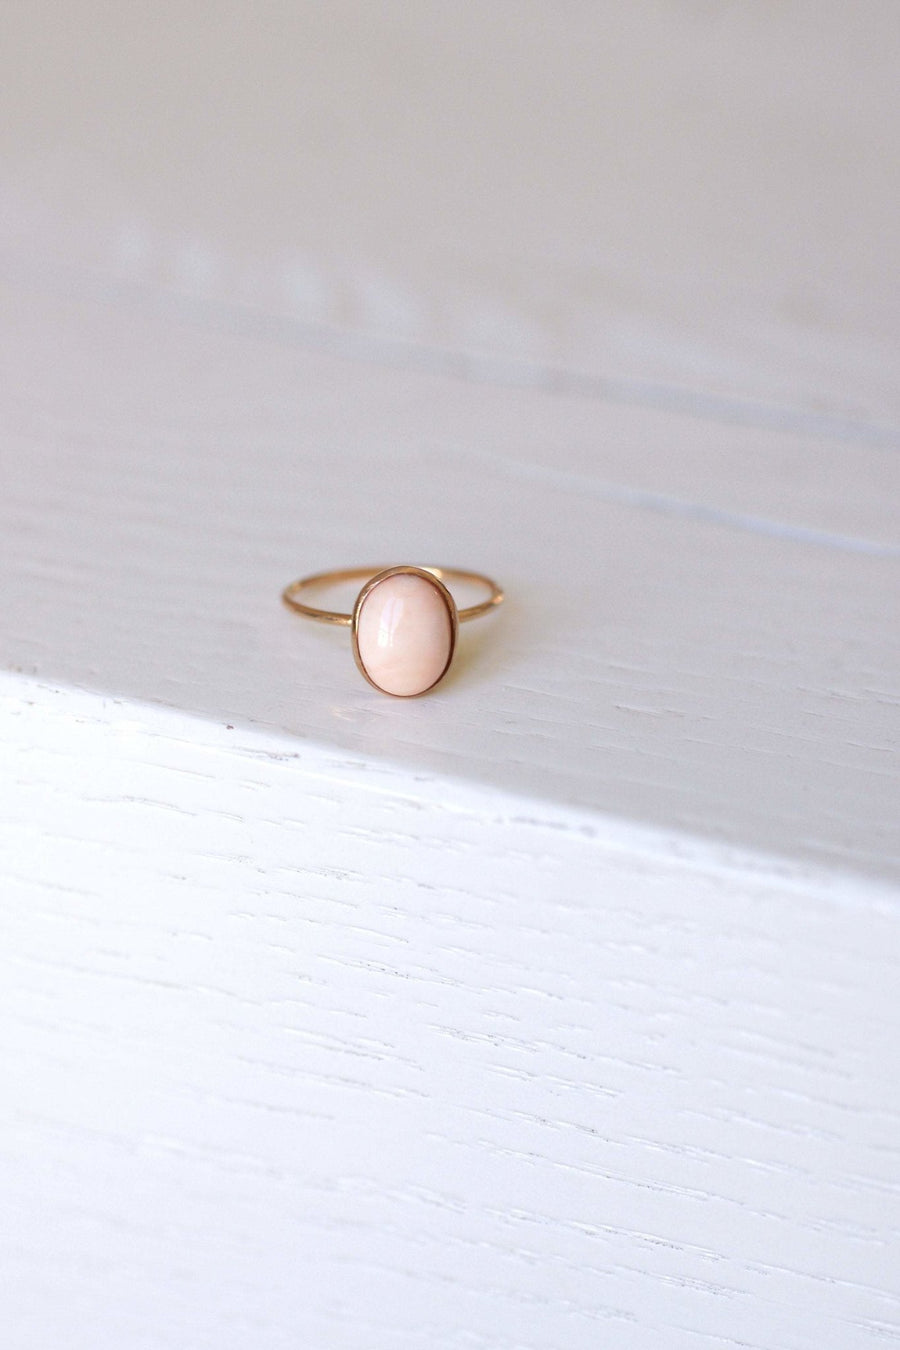 Antique pink gold coral angel skin ring - Penelope Gallery